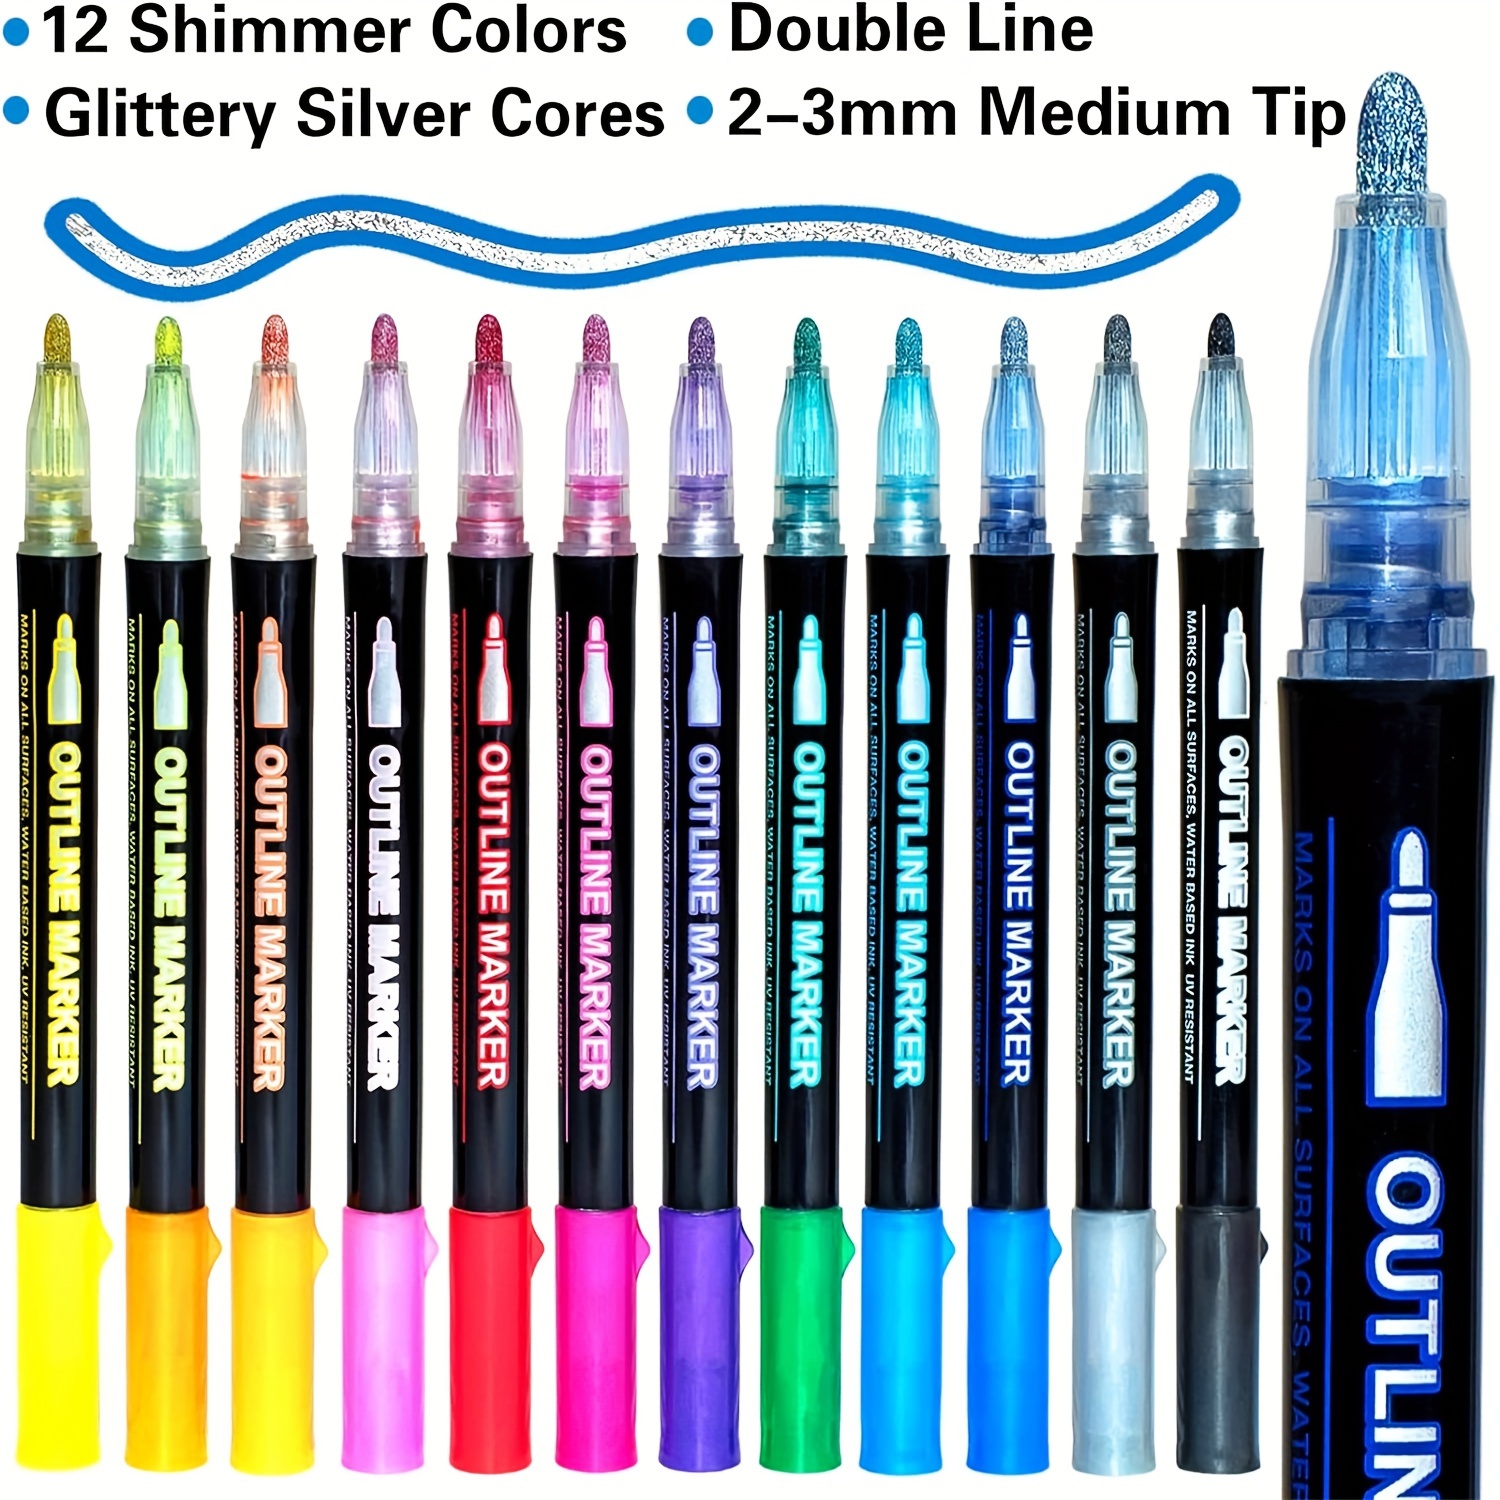 Shimmer Markers Doodle Outline Dazzles: 12 Colors Glitter Double Line  Metallic Pen Set Super Squiggles Sparkle Cool Fun Fancy Self Sparkly  Dazzlers